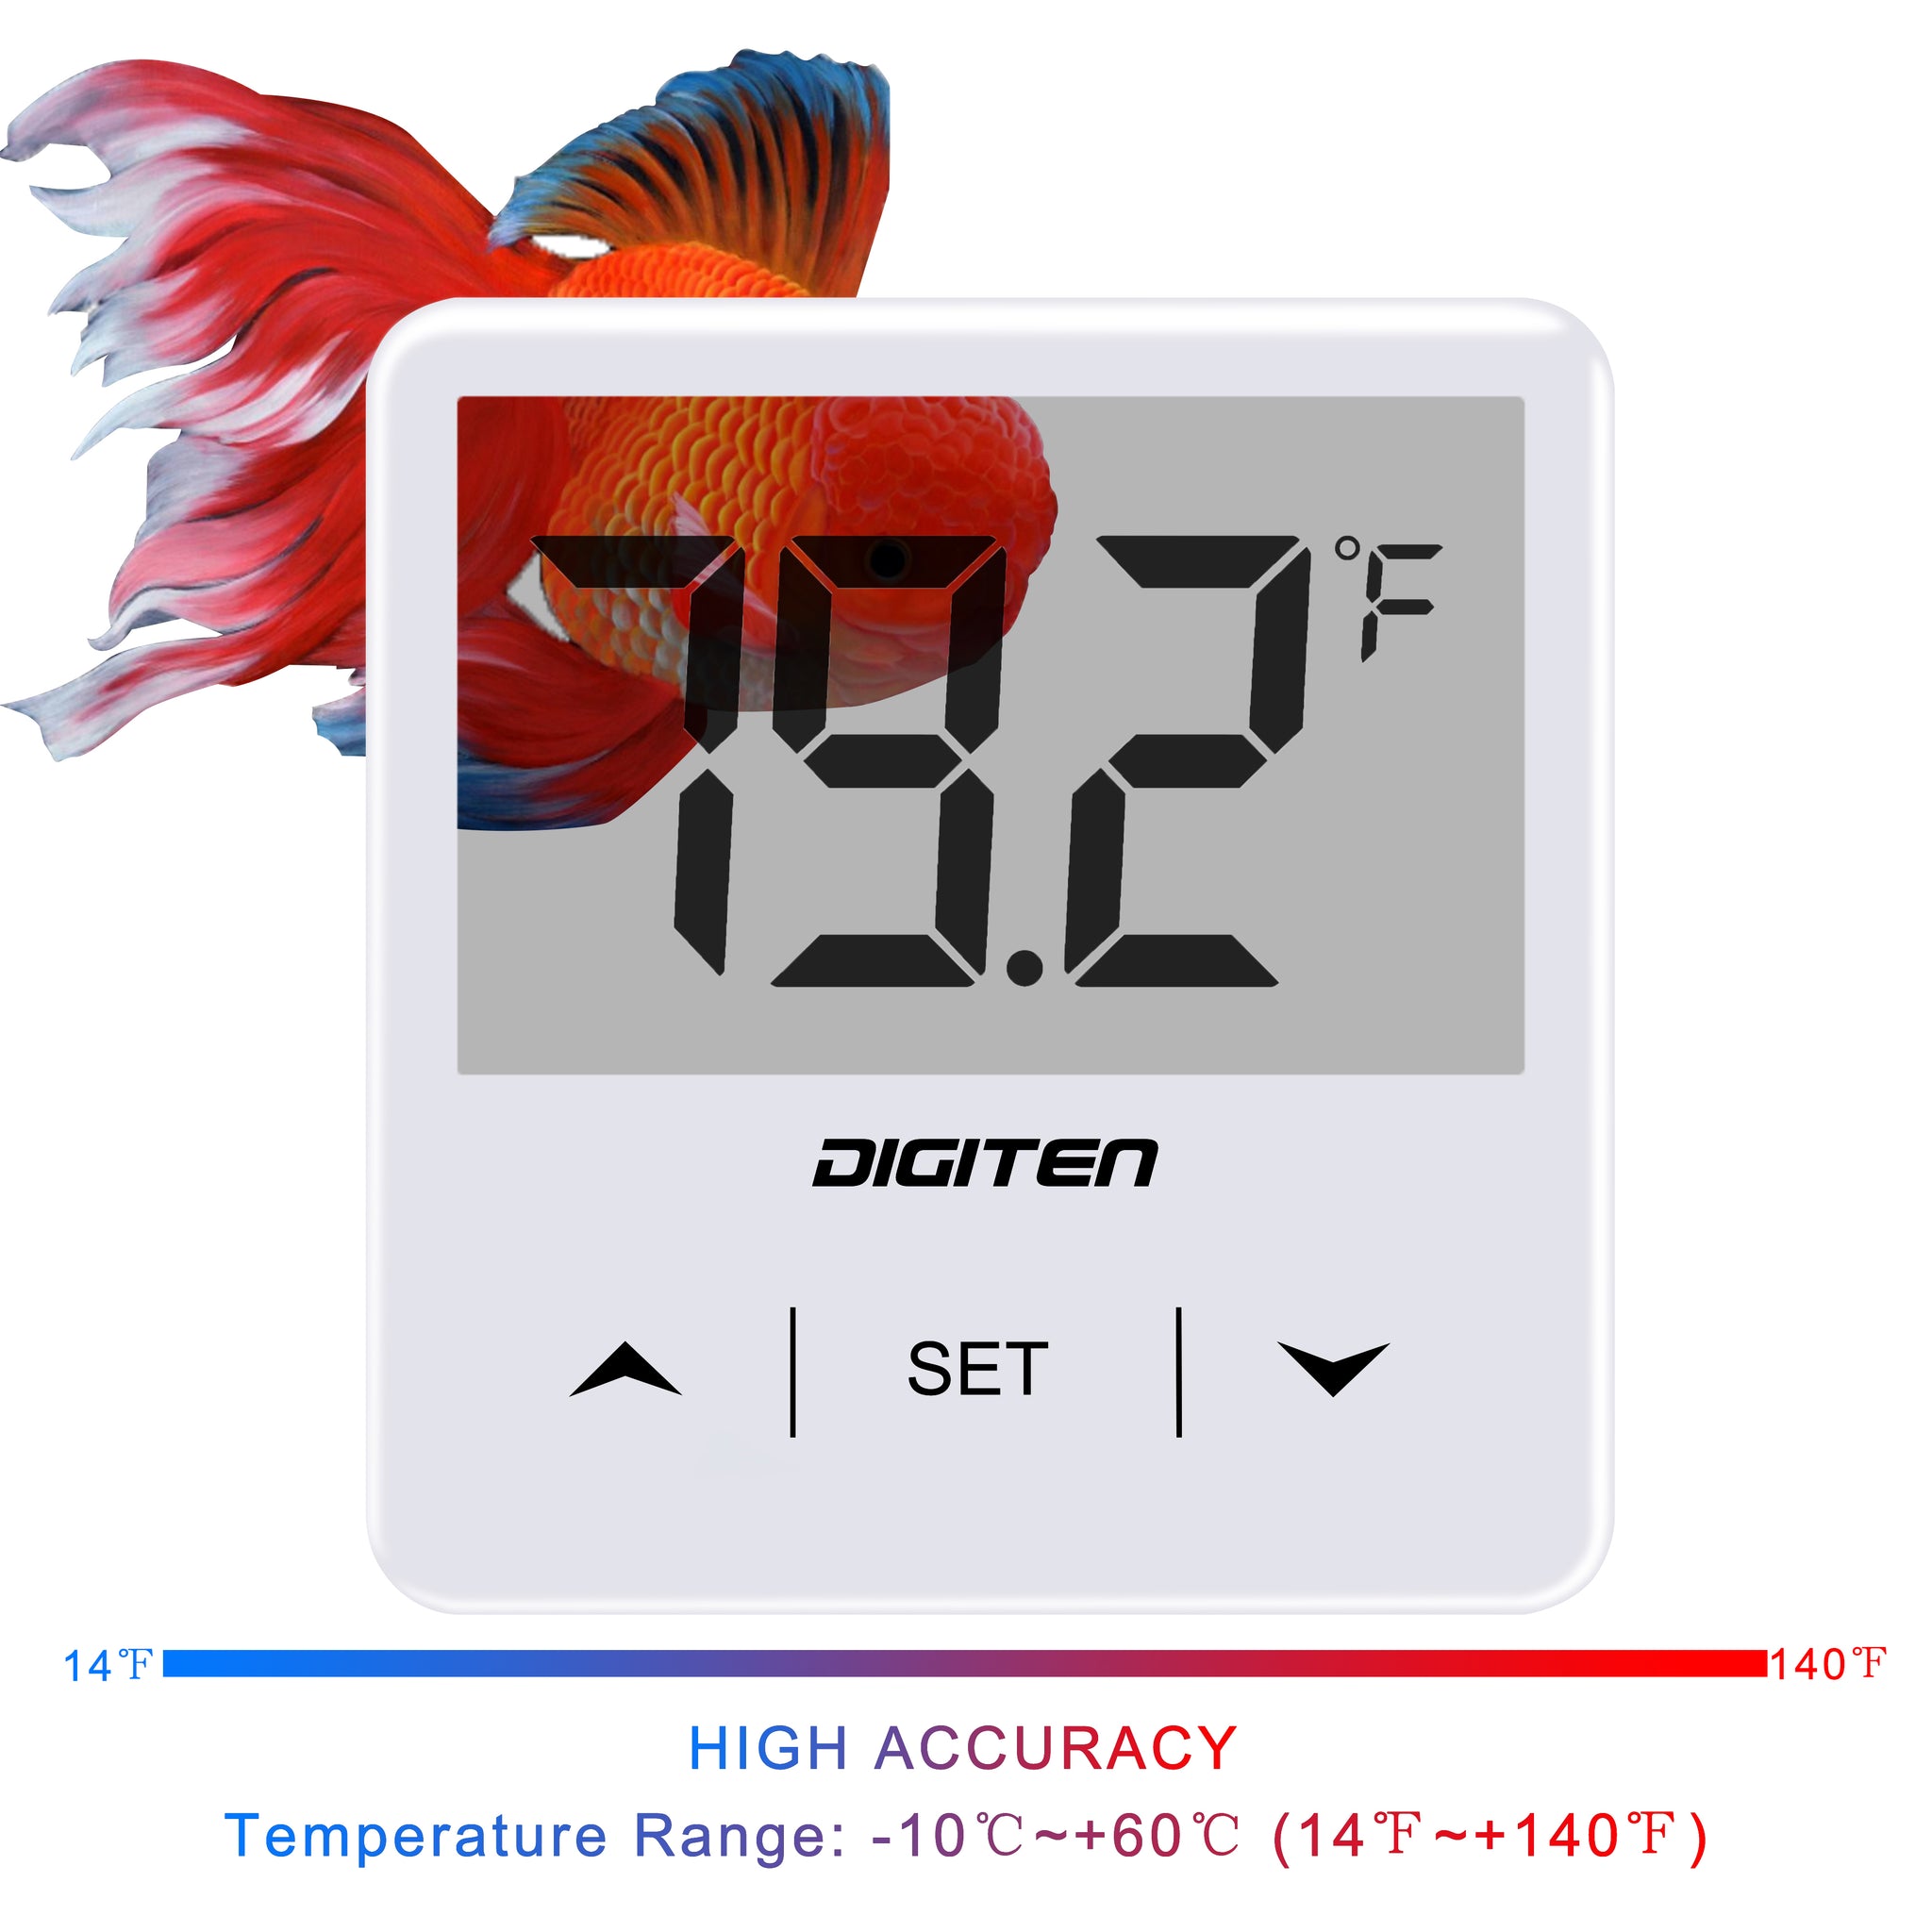 capetsma Aquarium Thermometer Digital Fish Tank Thermometer Large LCD  Screen Records High & Low Water Temperature in 24 hrs Black